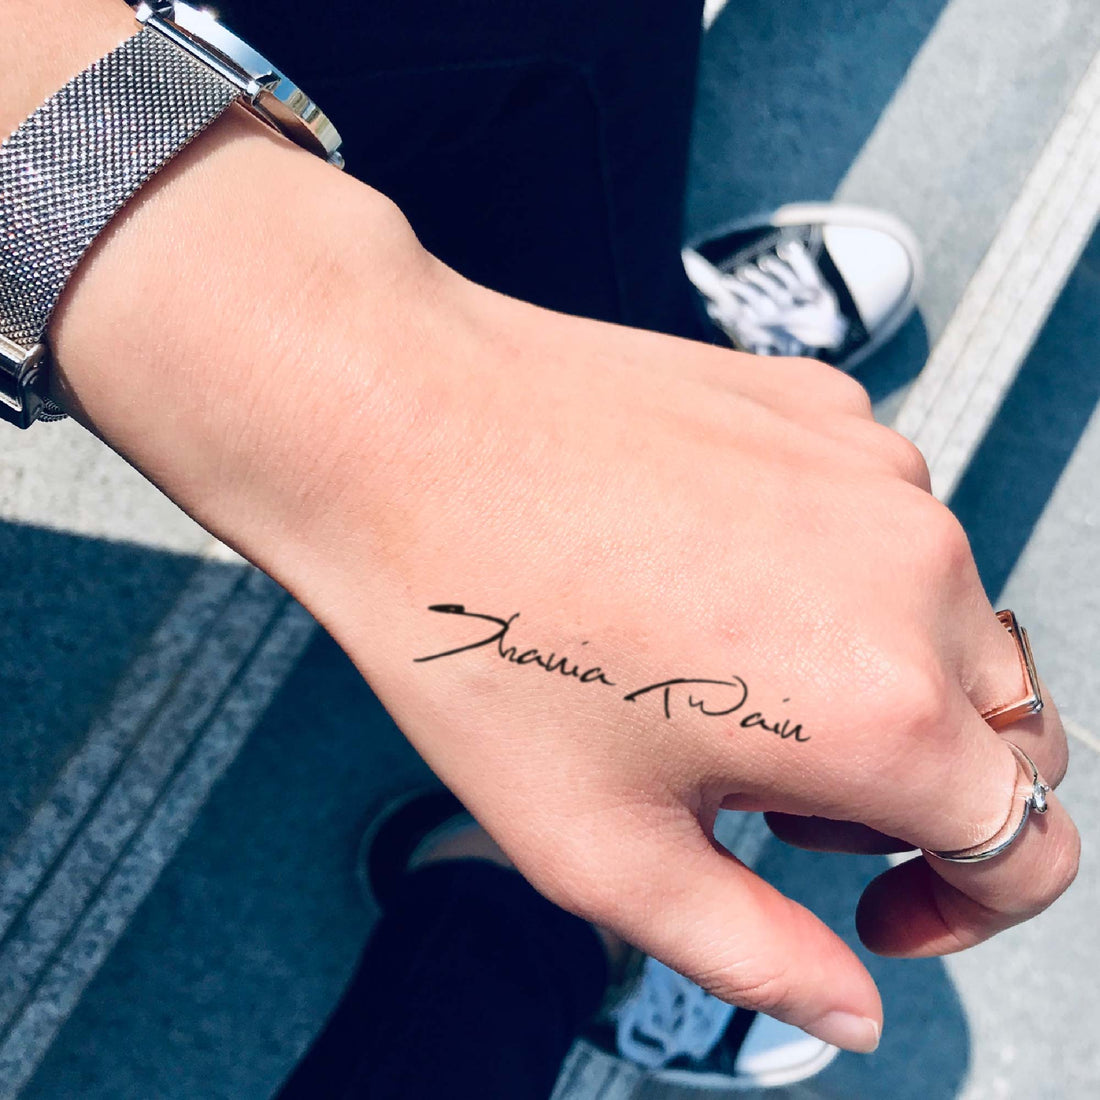 Shania Twain custom temporary tattoo sticker design idea inspiration meanings removal arm wrist hand words font name signature calligraphy lyrics tour concert outfits merch accessory gift souvenir costumes wear dress up code